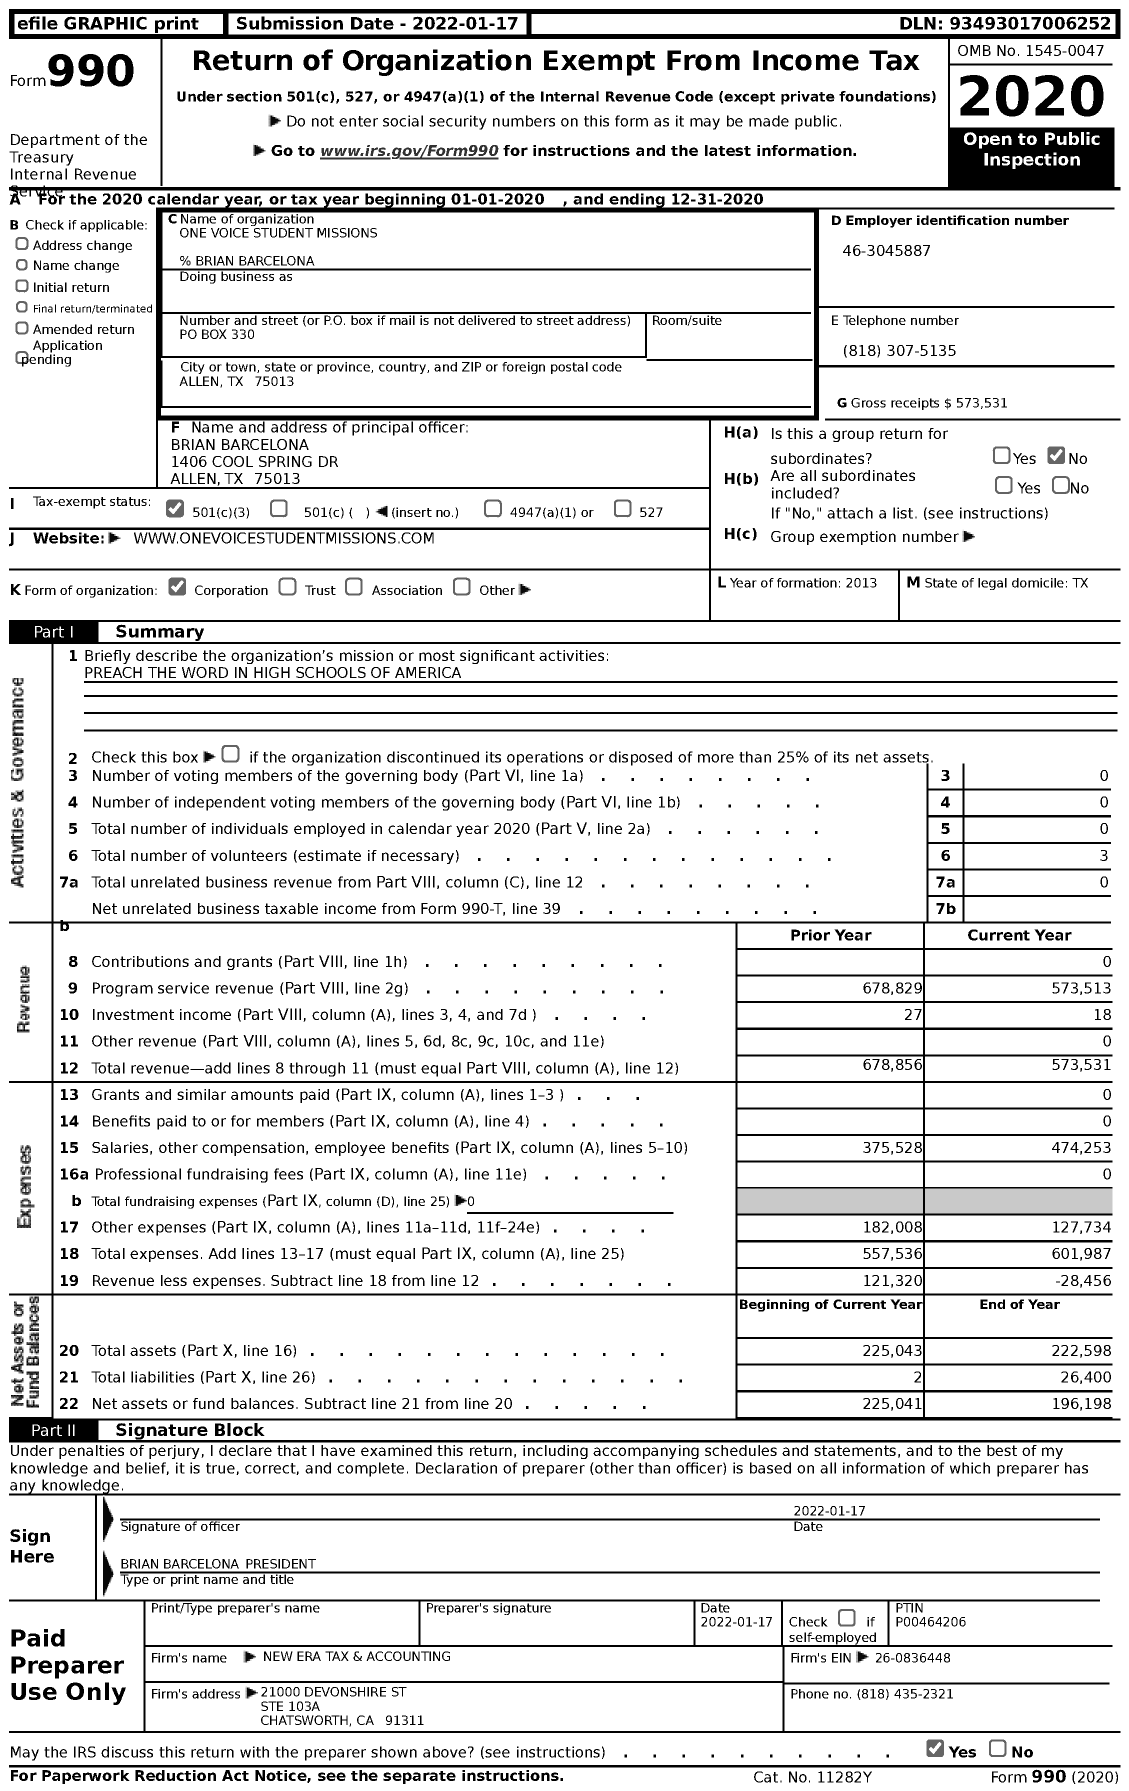 Image of first page of 2020 Form 990 for One Voice Student Missions